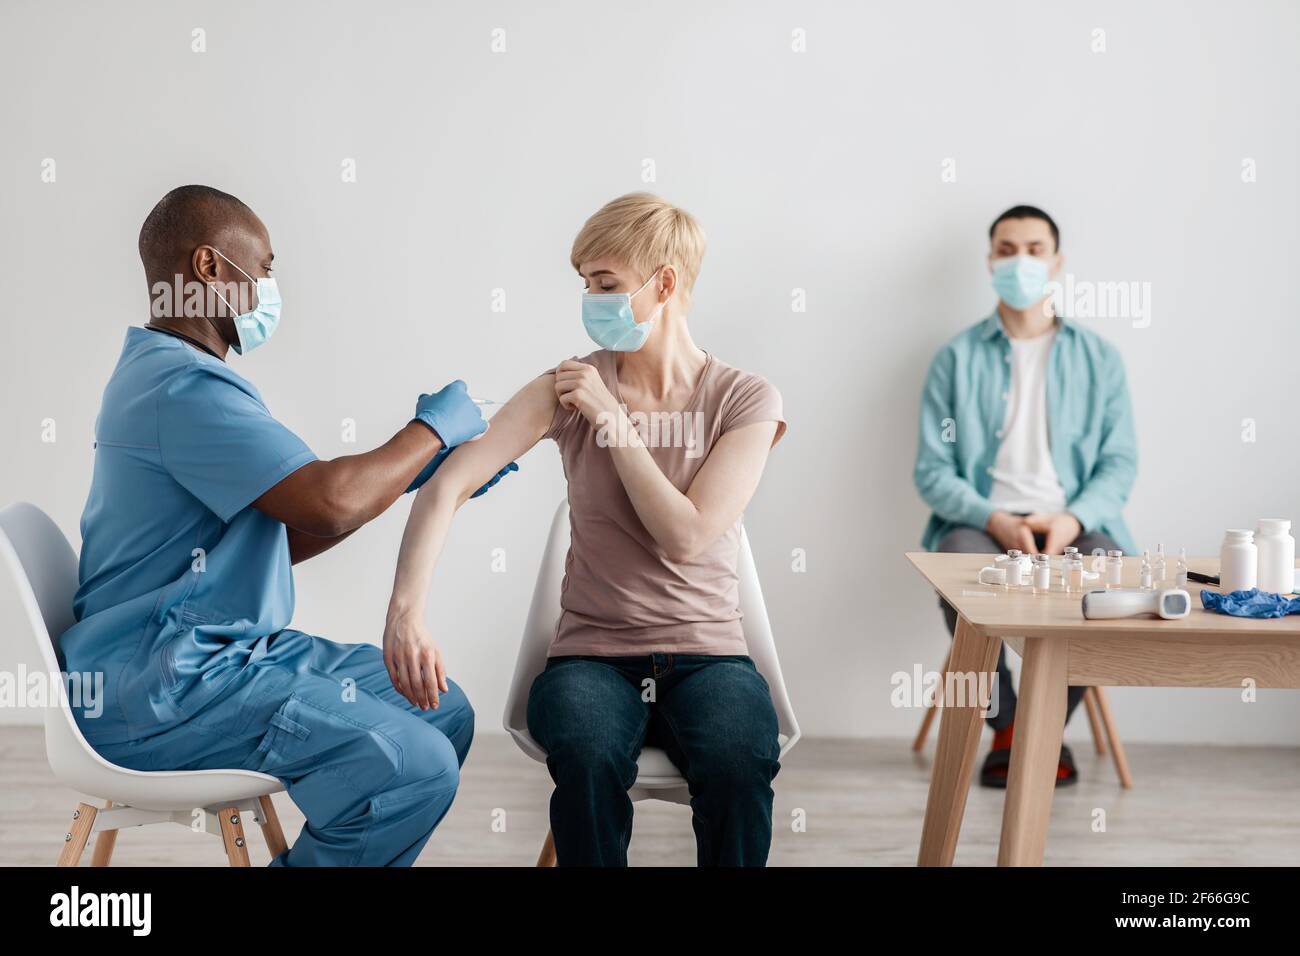 Vaccination and protection against influenza, health care, immunization campaign Stock Photo